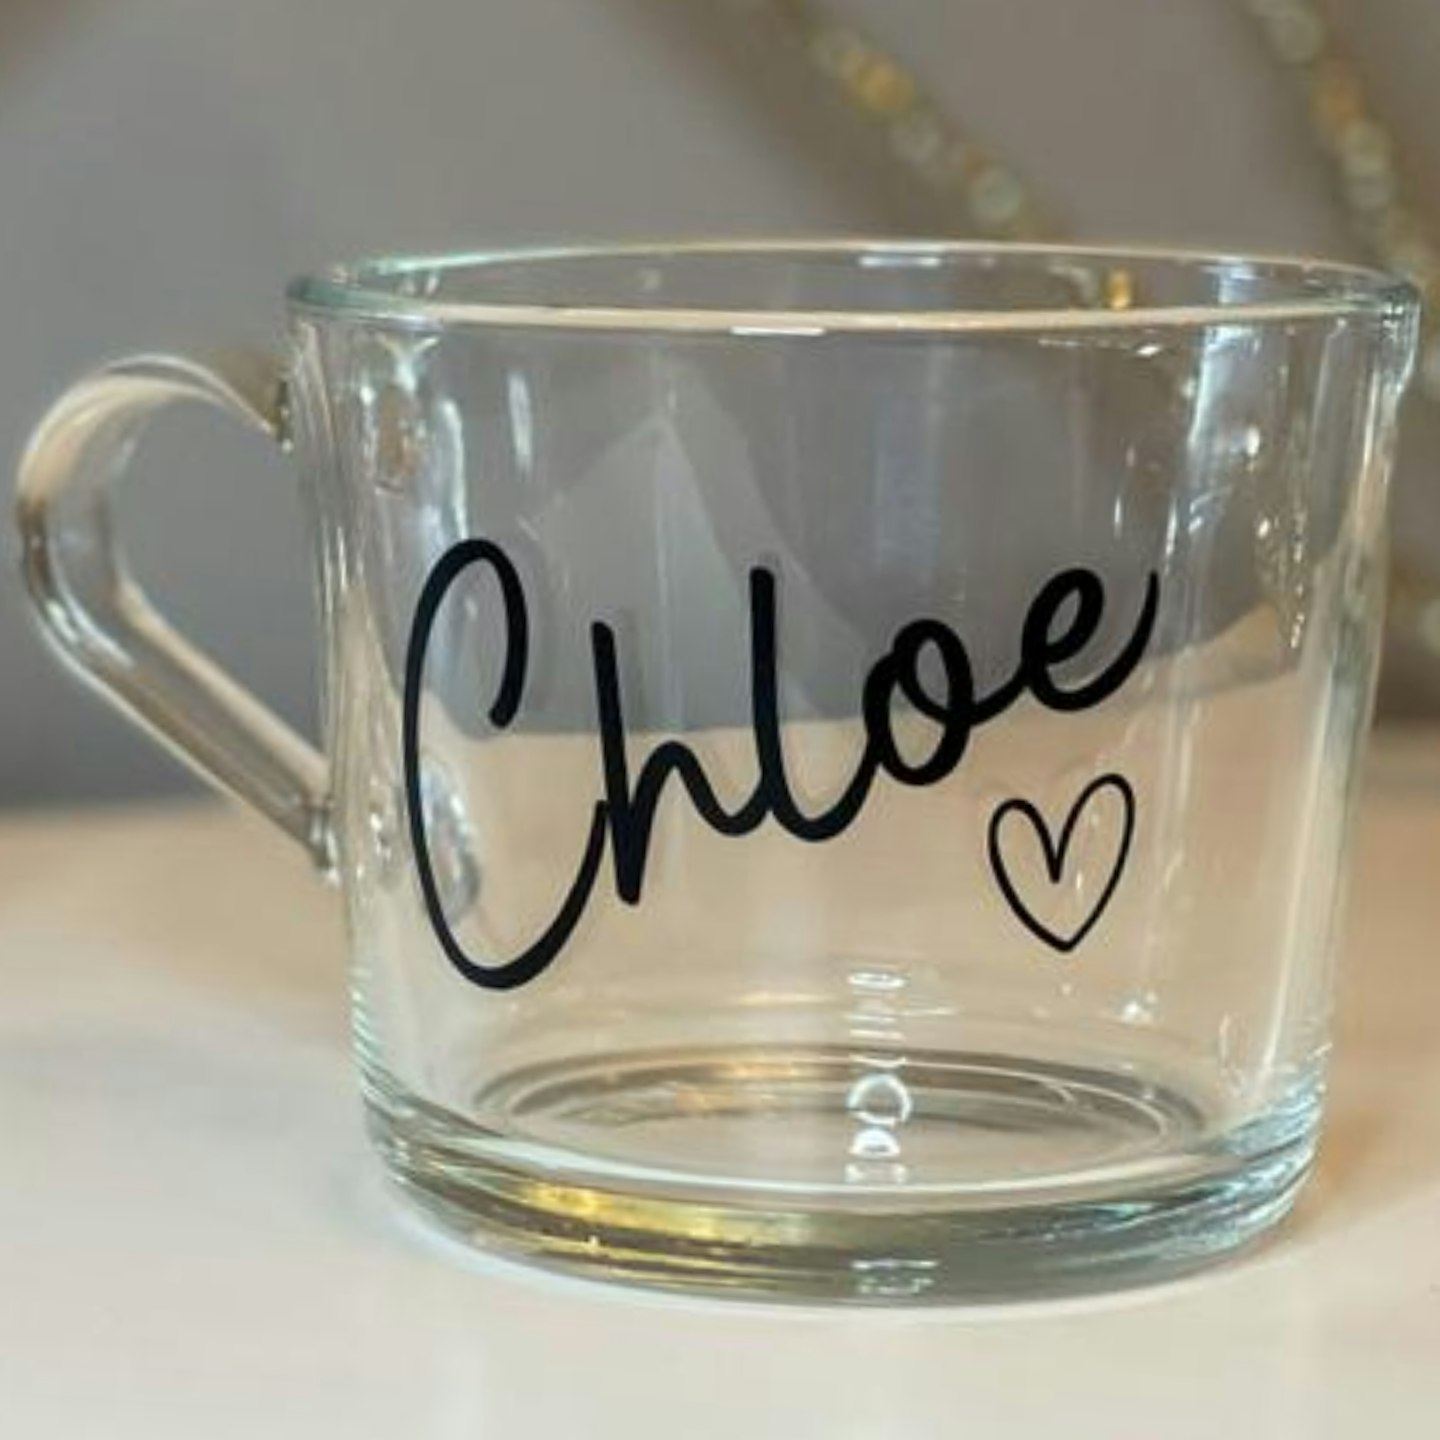 Molly-mae hague personalised glass coffee cup